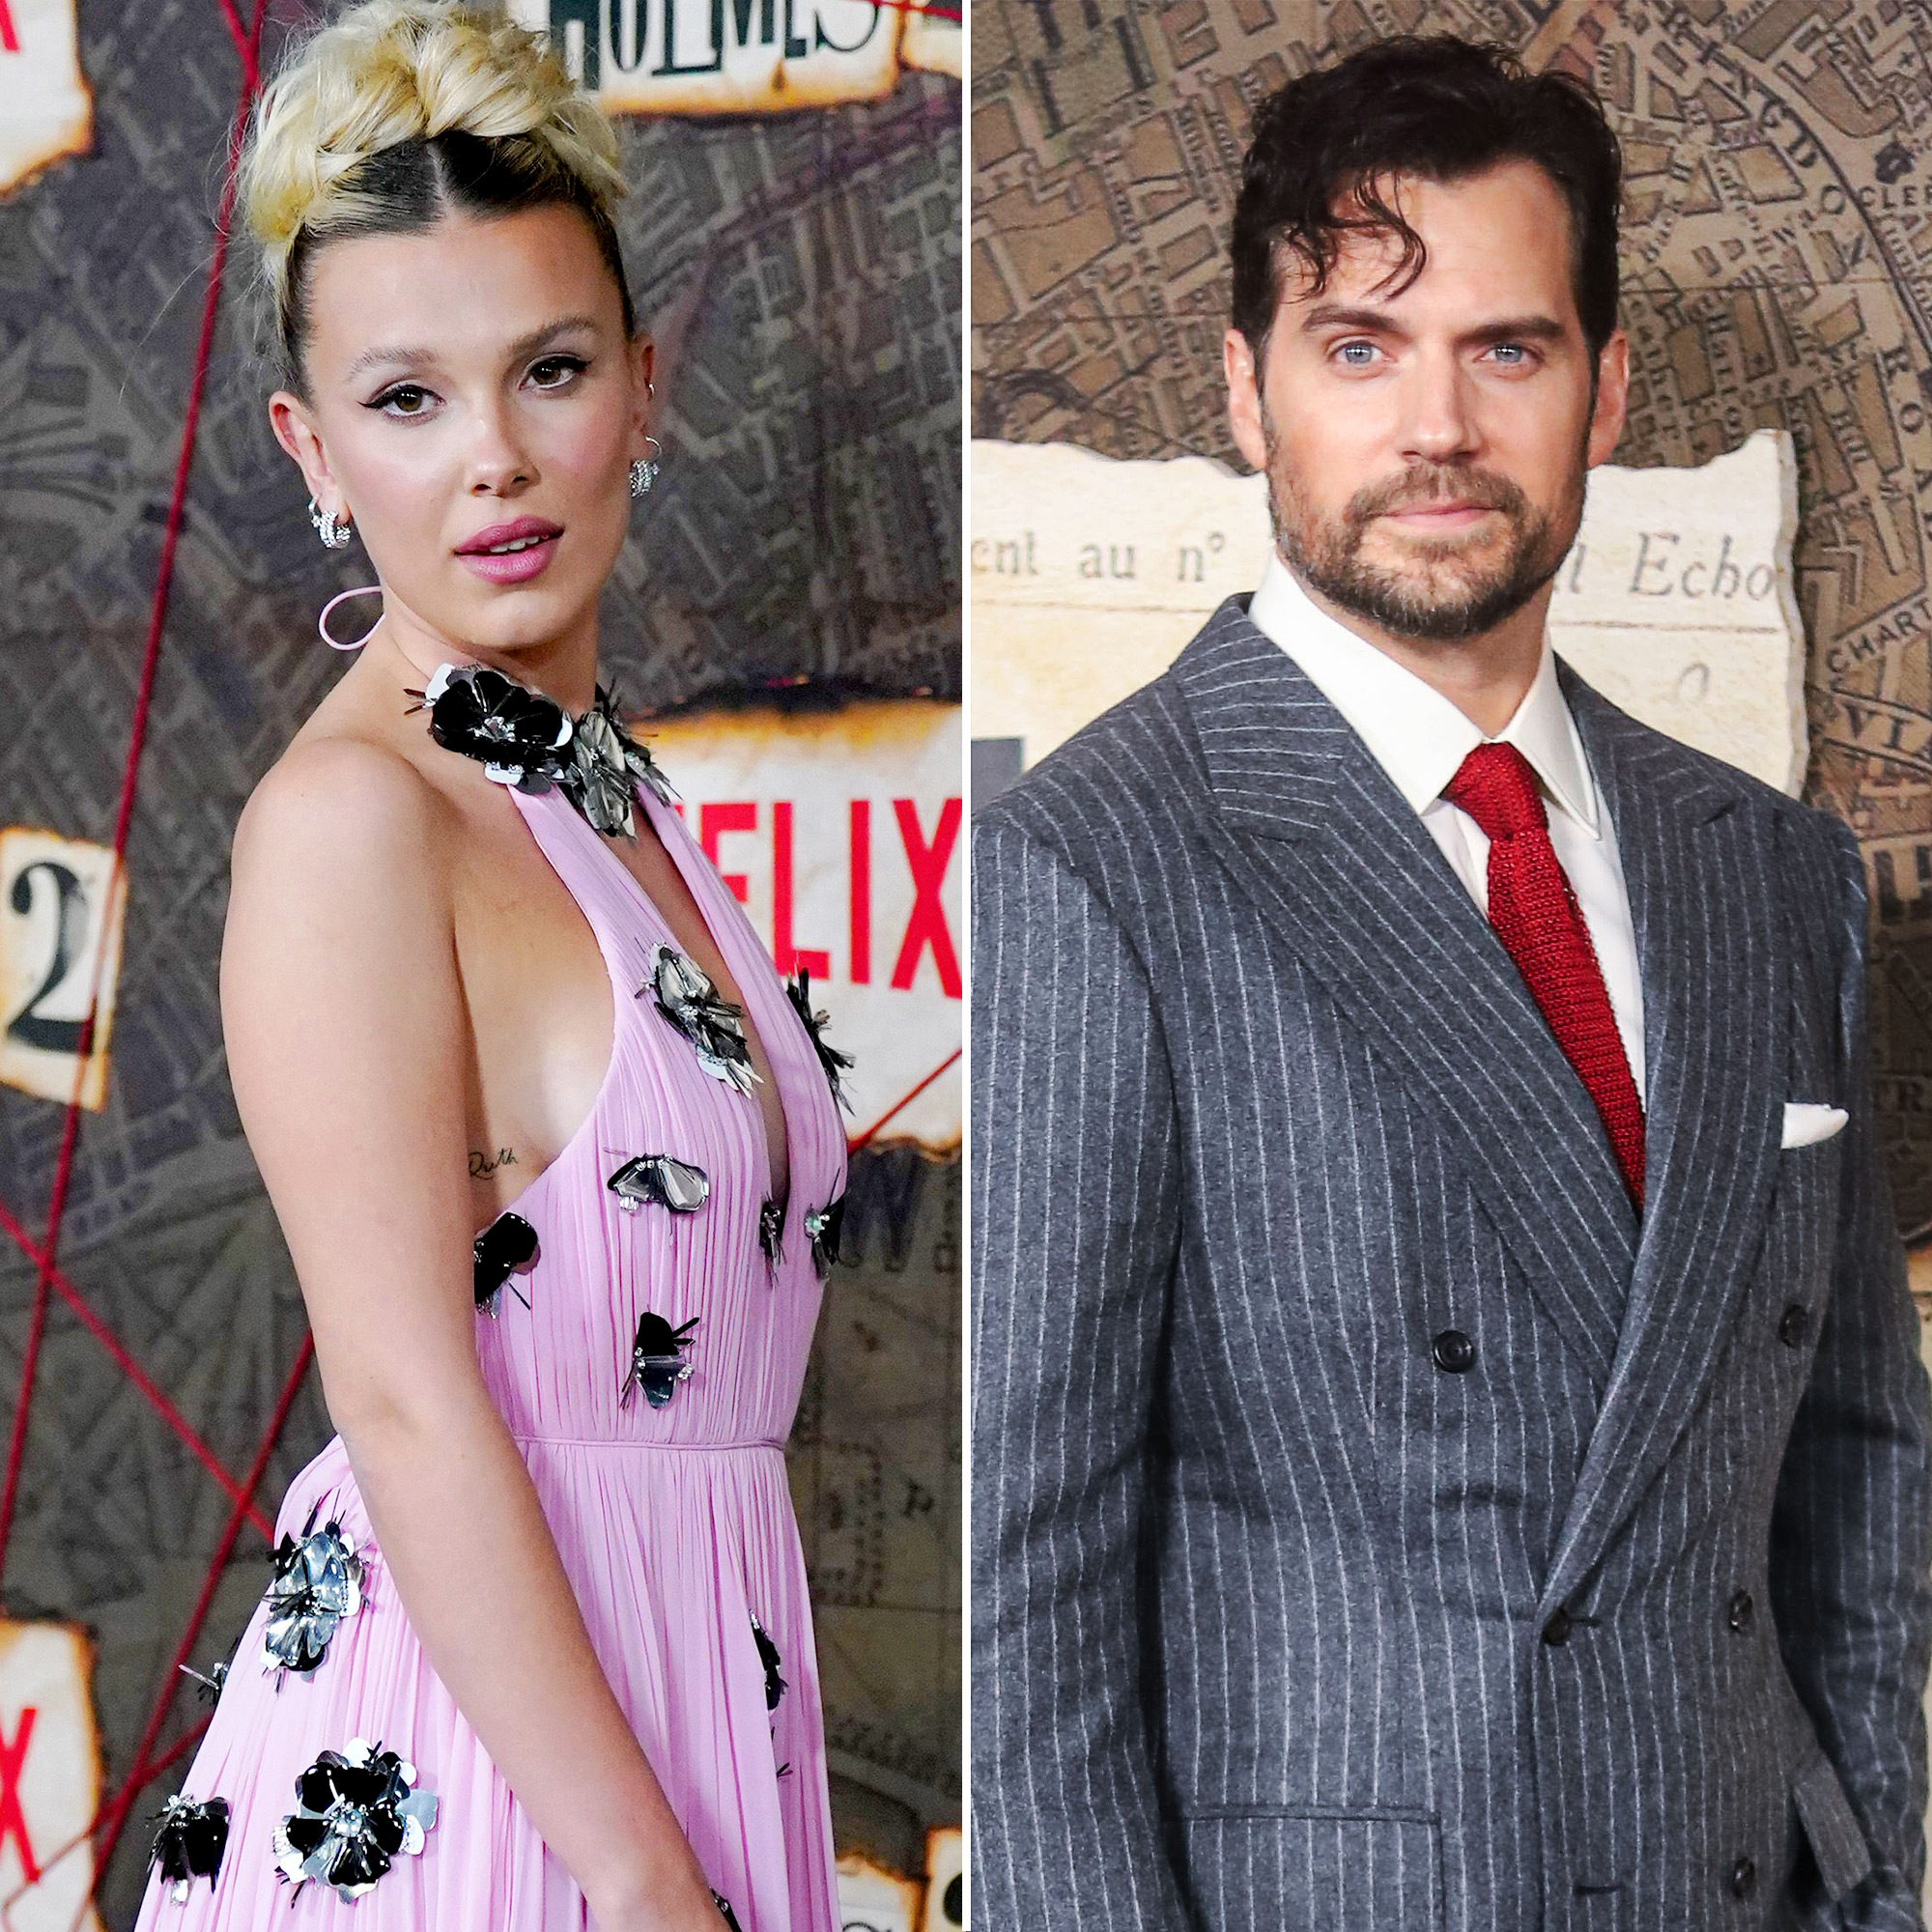 Bobbie Brown - Millie Bobby Brown Details' Adult' Friendship With Henry Cavill